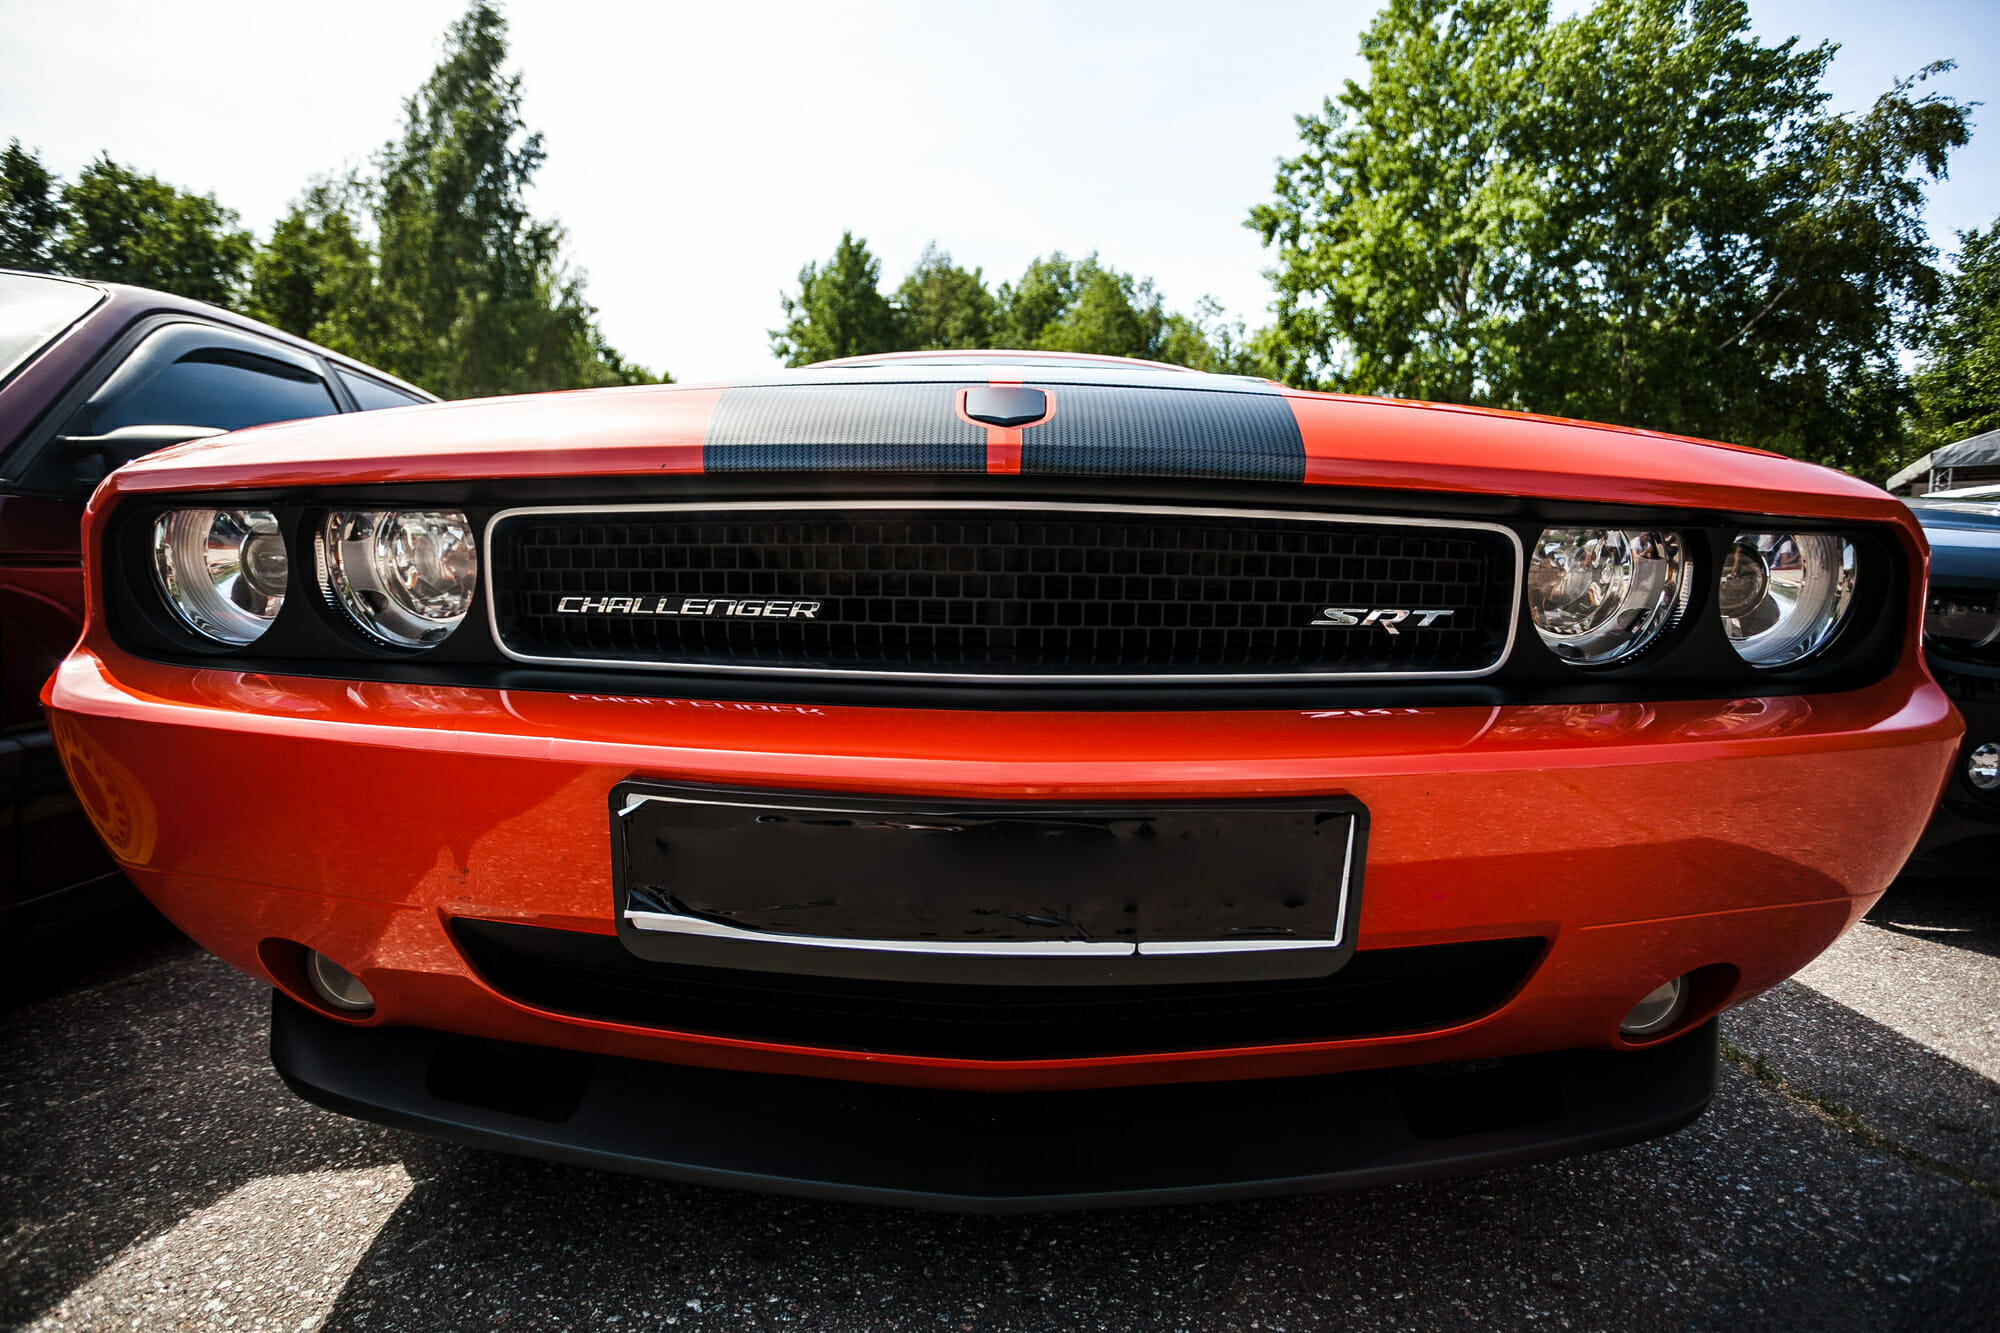 Close Up of Dodge Challenger - Vehicle History